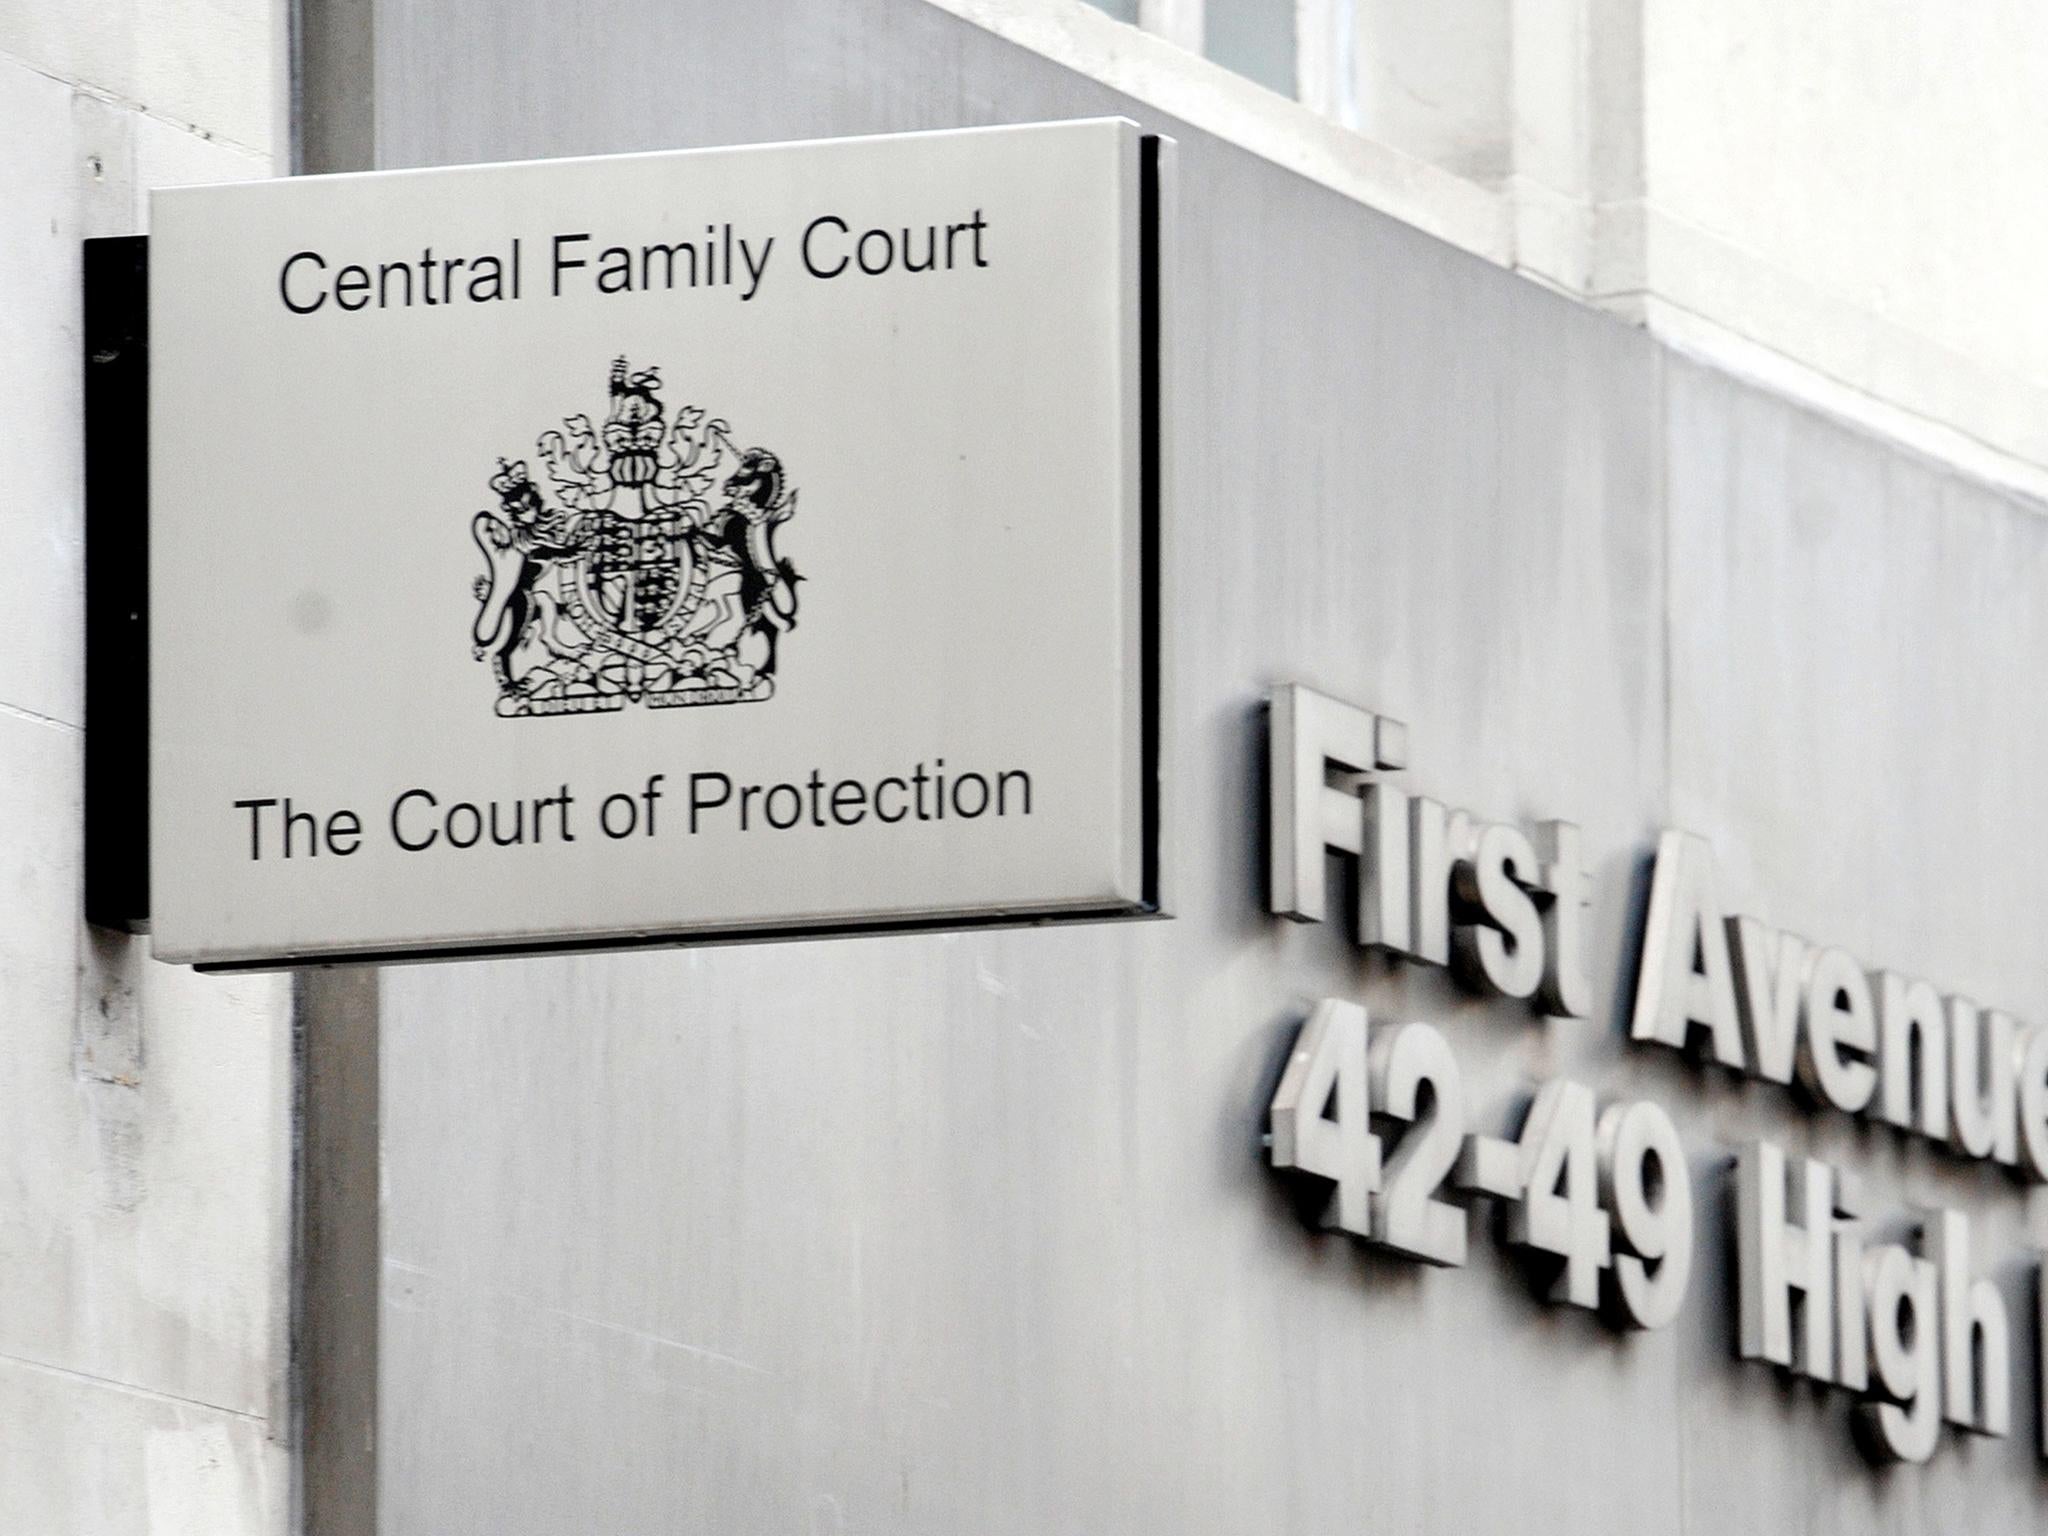 The case was heard at the Court of Protection in London